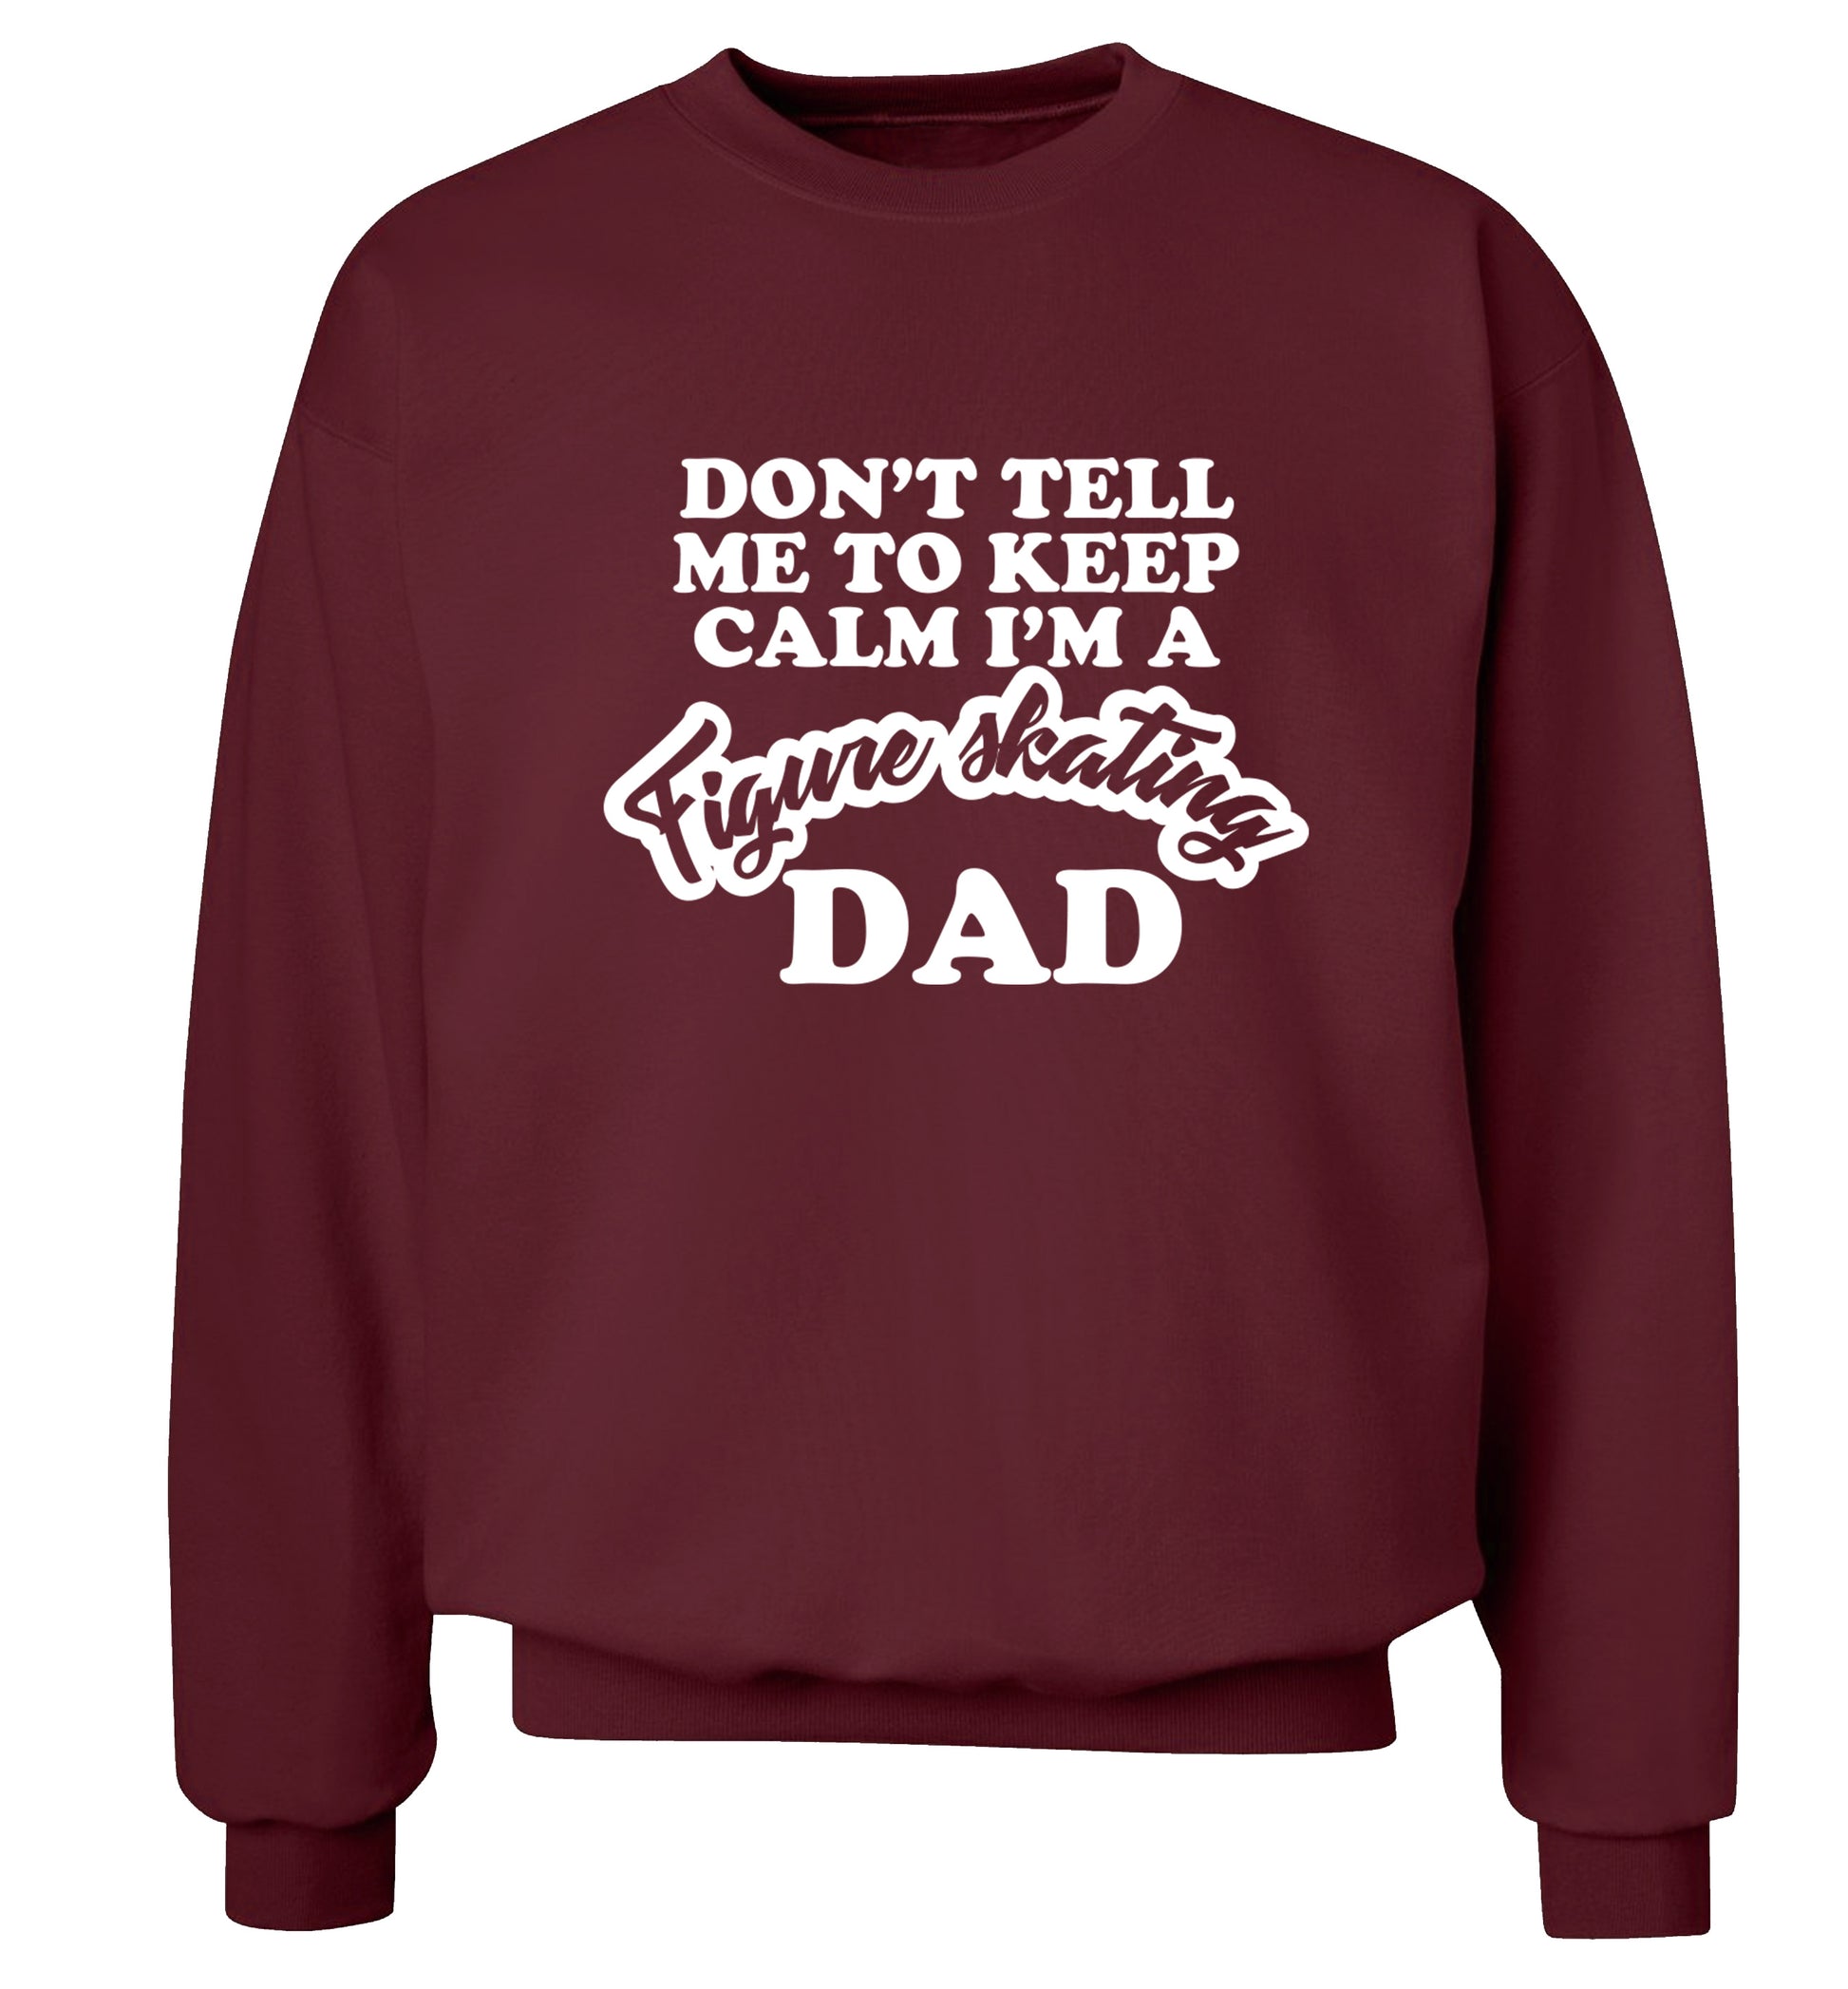 Don't tell me to keep calm I'm a figure skating dad Adult's unisexmaroon Sweater 2XL